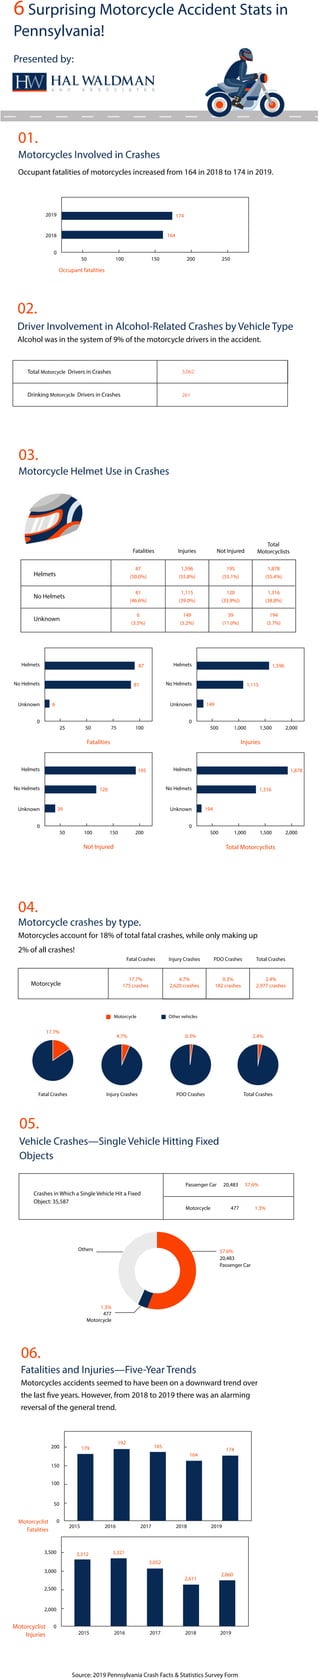 Driver Involvement in Alcohol-Related Crashes by Vehicle Type
Alcohol was in the system of 9% of the motorcycle drivers in the accident.
02.
6 Surprising Motorcycle Accident Stats in
Pennsylvania!
Total Motorcycle Drivers in Crashes
Drinking Motorcycle Drivers in Crashes
3,062
261
Presented by:
Occupant fatalities
Occupant fatalities of motorcycles increased from 164 in 2018 to 174 in 2019.
Motorcycles Involved in Crashes
01.
50
0
2018
2019
100 150
174
164
200 250
Motorcycle Helmet Use in Crashes
03.
Fatalities
25
0
Unknown
No Helmets
50 75
81
6
100
Helmets 87
Injuries
500
0
Unknown
No Helmets
1,000 1,500
1,115
149
2,000
Helmets 1,596
Not Injured
50
0
Unknown
No Helmets
100 150
120
39
200
Helmets 195
Total Motorcyclists
500
0
Unknown
No Helmets
1,000 1,500
1,316
194
2,000
Helmets 1,878
Helmets
No Helmets
Unknown
87
(50.0%)
1,596
(55.8%)
195
(55.1%)
1,878
(55.4%)
81
(46.6%)
1,115
(39.0%)
120
(33.9%))
1,316
(38.8%)
6
(3.5%)
149
(5.2%)
39
(11.0%)
194
(5.7%)
Fatalities Injuries Not Injured
Total
Motorcyclists
Crashes in Which a Single Vehicle Hit a Fixed
Object: 35,587
Passenger Car 20,483 57.6%
Motorcycle 477 1.3%
Vehicle Crashes—Single Vehicle Hitting Fixed
Objects
05.
17.7%
4.7% 0.3% 2.4%
Fatal Crashes PDO Crashes Total CrashesInjury Crashes
Motorcycle crashes by type.
Motorcycles account for 18% of total fatal crashes, while only making up
2% of all crashes!
04.
Motorcycle
17.7%
175 crashes
4.7%
2,620 crashes
0.3%
182 crashes
2.4%
2,977 crashes
Fatal Crashes Injury Crashes PDO Crashes Total Crashes
Motorcycle Other vehicles
57.6%
20,483
Passenger Car
1.3%
477
Motorcycle
Others
Motorcyclist
Injuries
Fatalities and Injuries—Five-Year Trends
Motorcycles accidents seemed to have been on a downward trend over
the last five years. However, from 2018 to 2019 there was an alarming
reversal of the general trend.
Motorcyclist
Fatalities
2015
0
50
100
150
200
2016 2017 2018 2019
06.
179
192
185
164
174
2015
0
2,000
2,500
3,000
3,500
2016 2017 2018 2019
3,312 3,321
3,052
2,611
2,860
Source: 2019 Pennsylvania Crash Facts & Statistics Survey Form
 